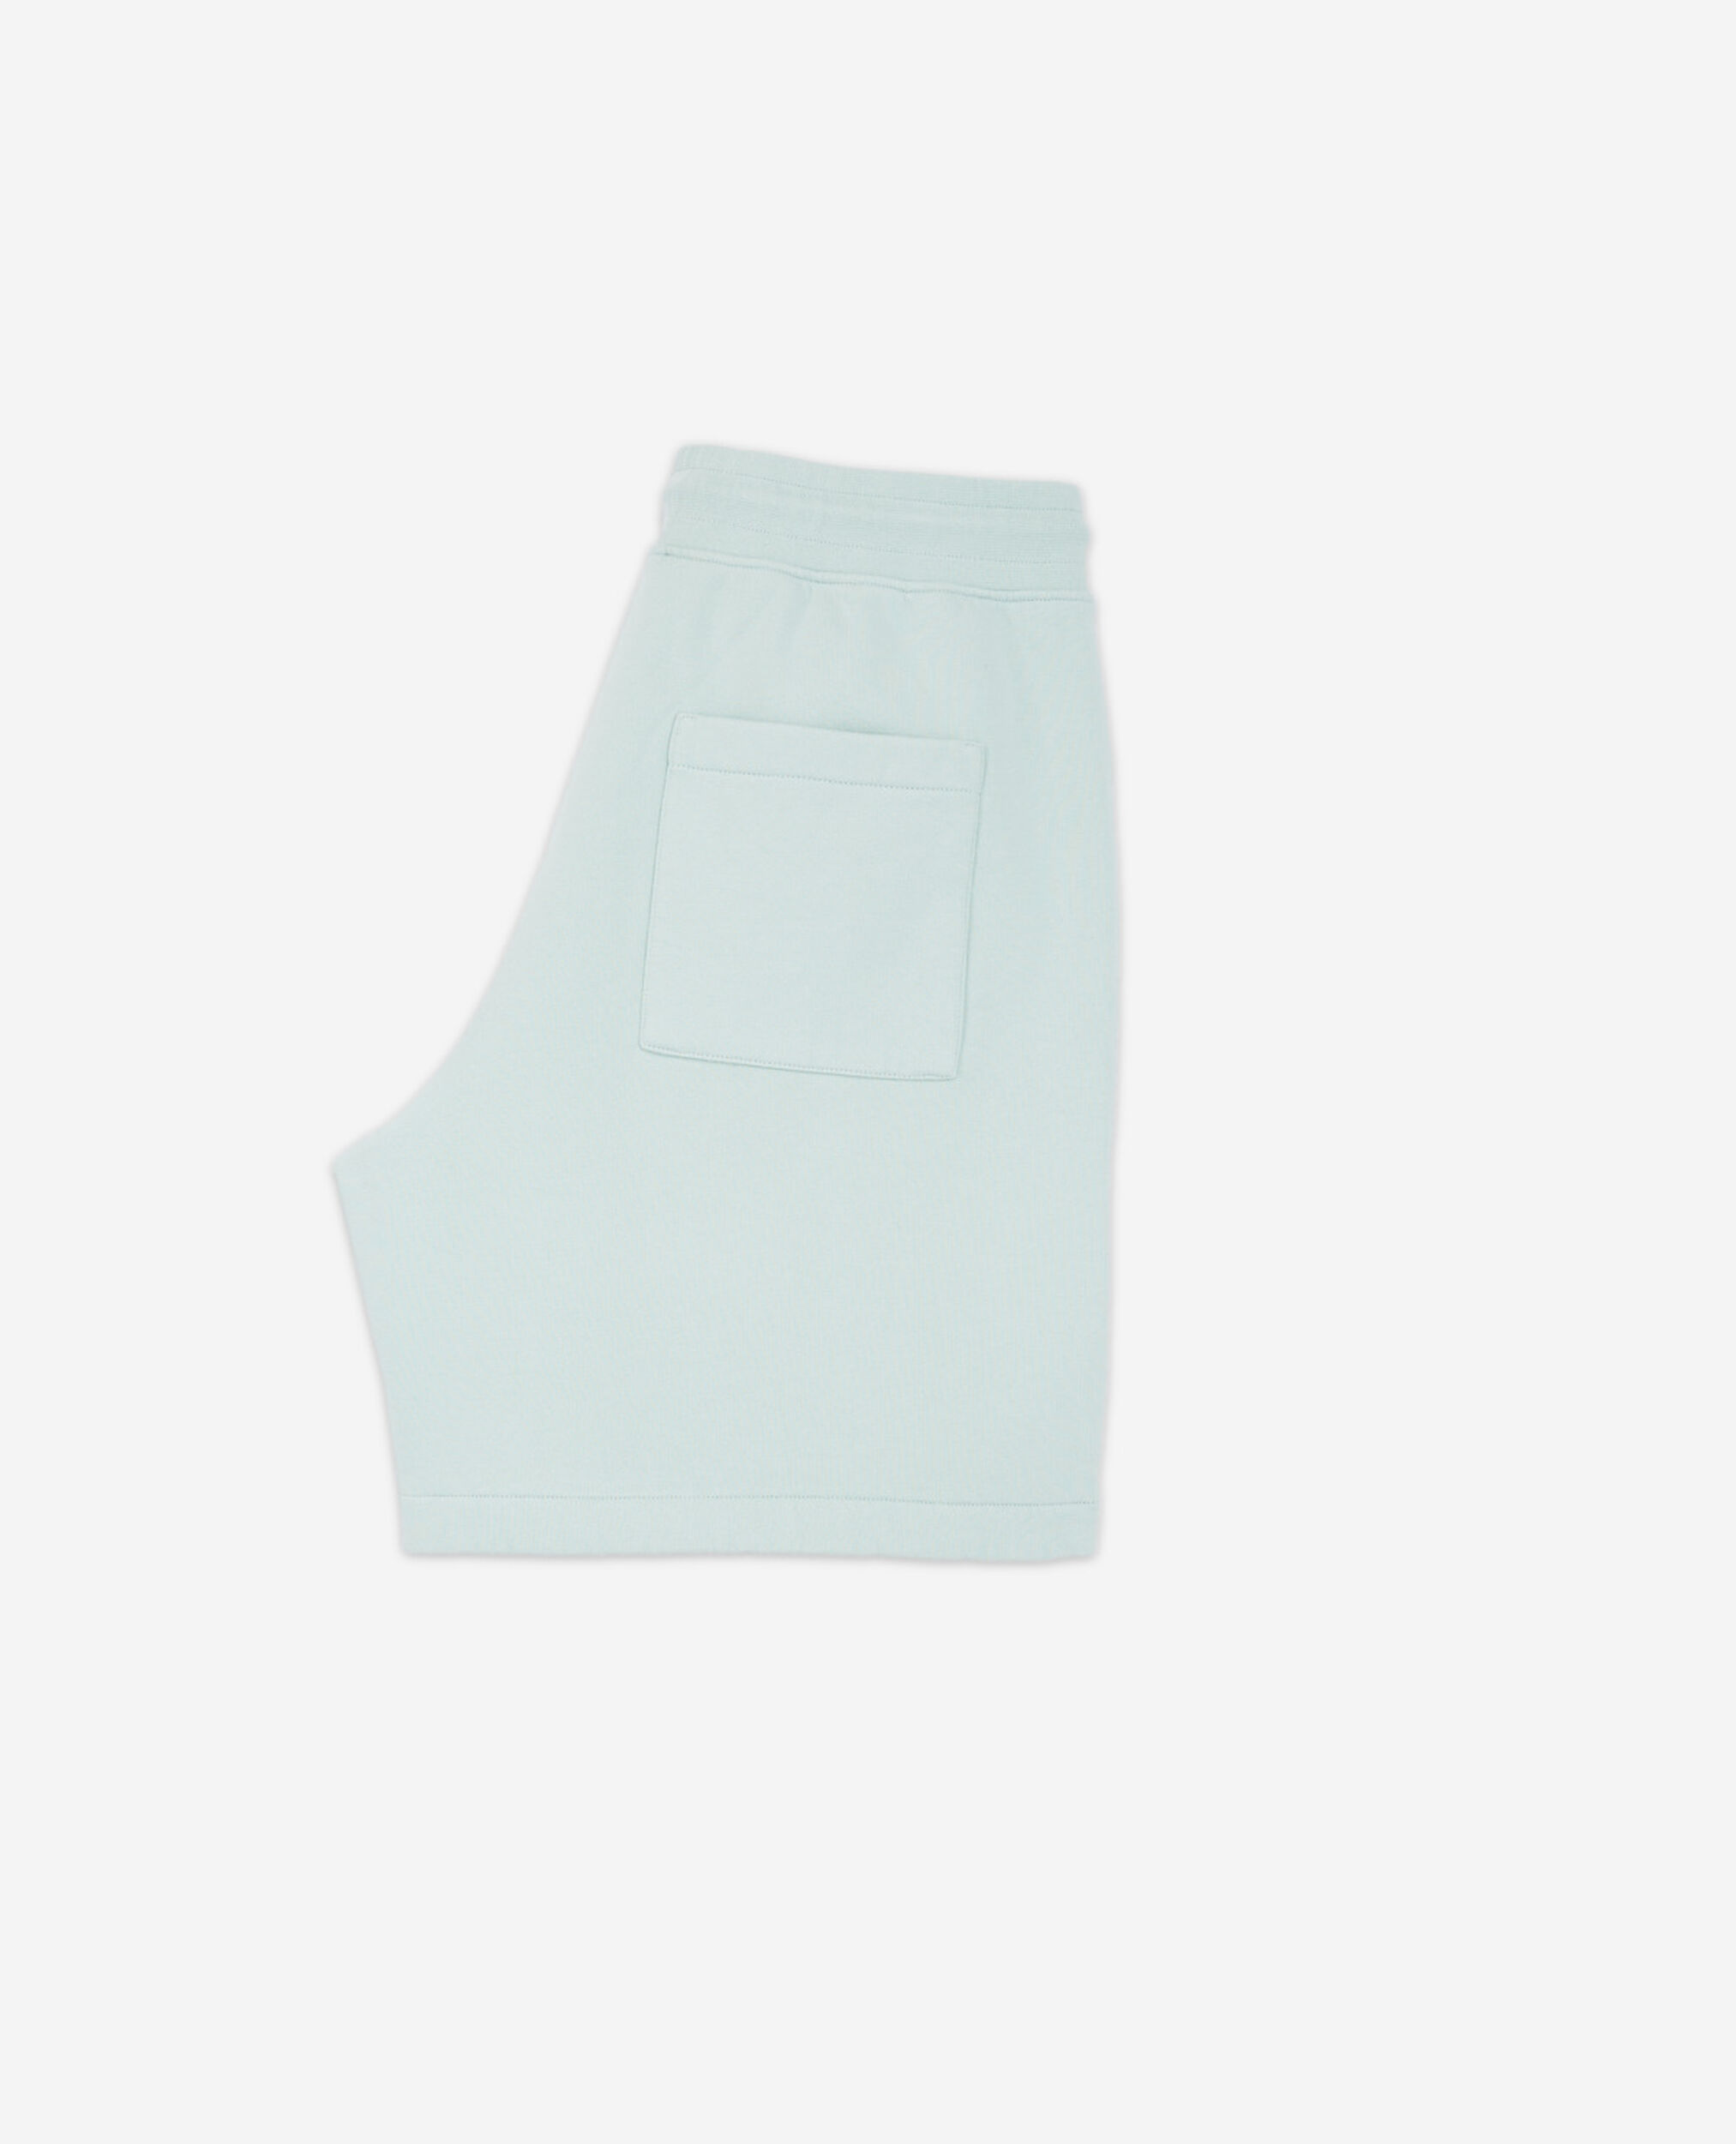 Green cotton shorts with logo and elastic waist, GRIS BLEU, hi-res image number null